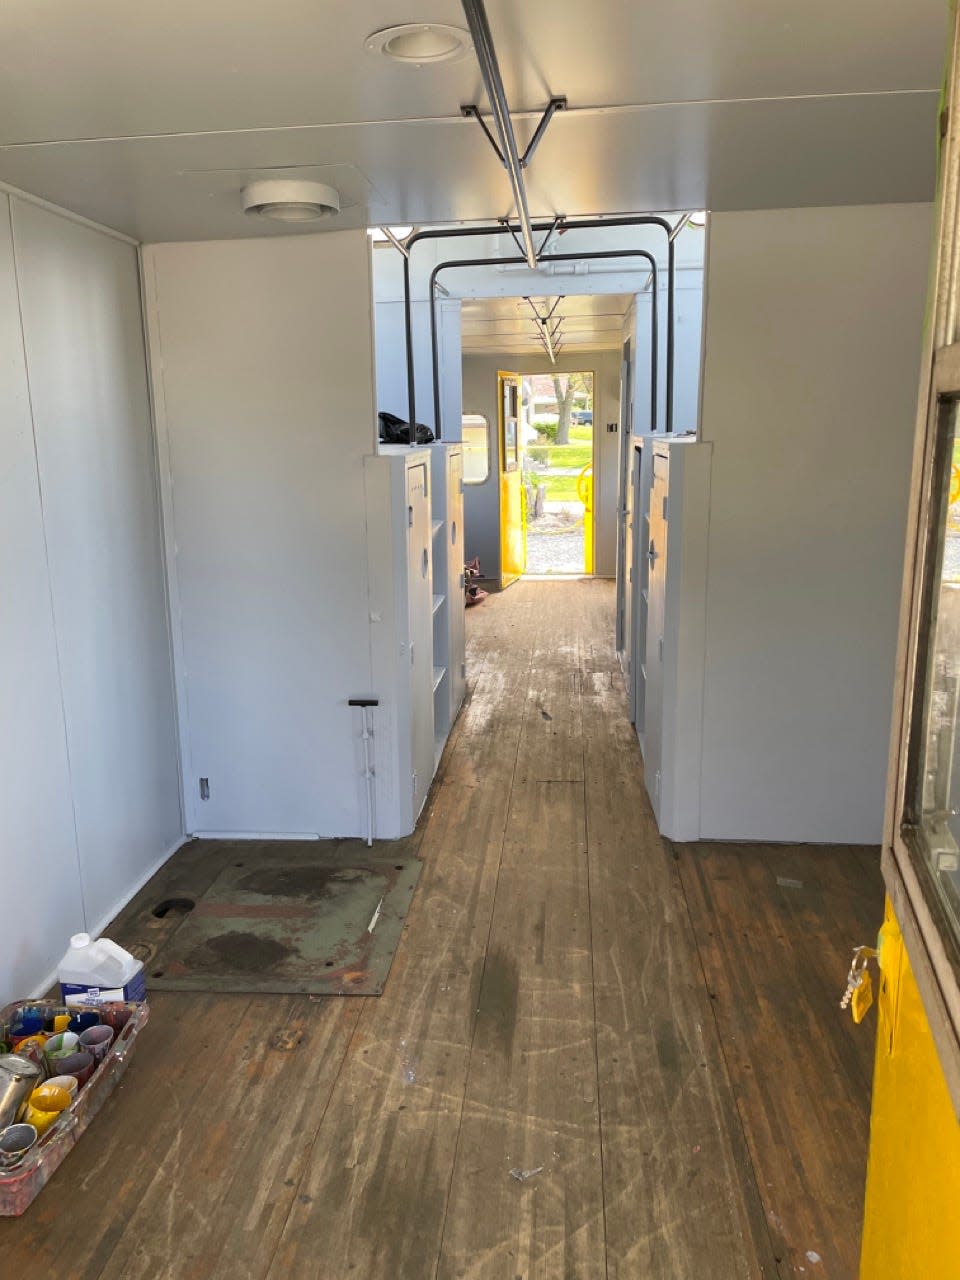 White walls and oak wood flooring installed in the Chessie System caboose.